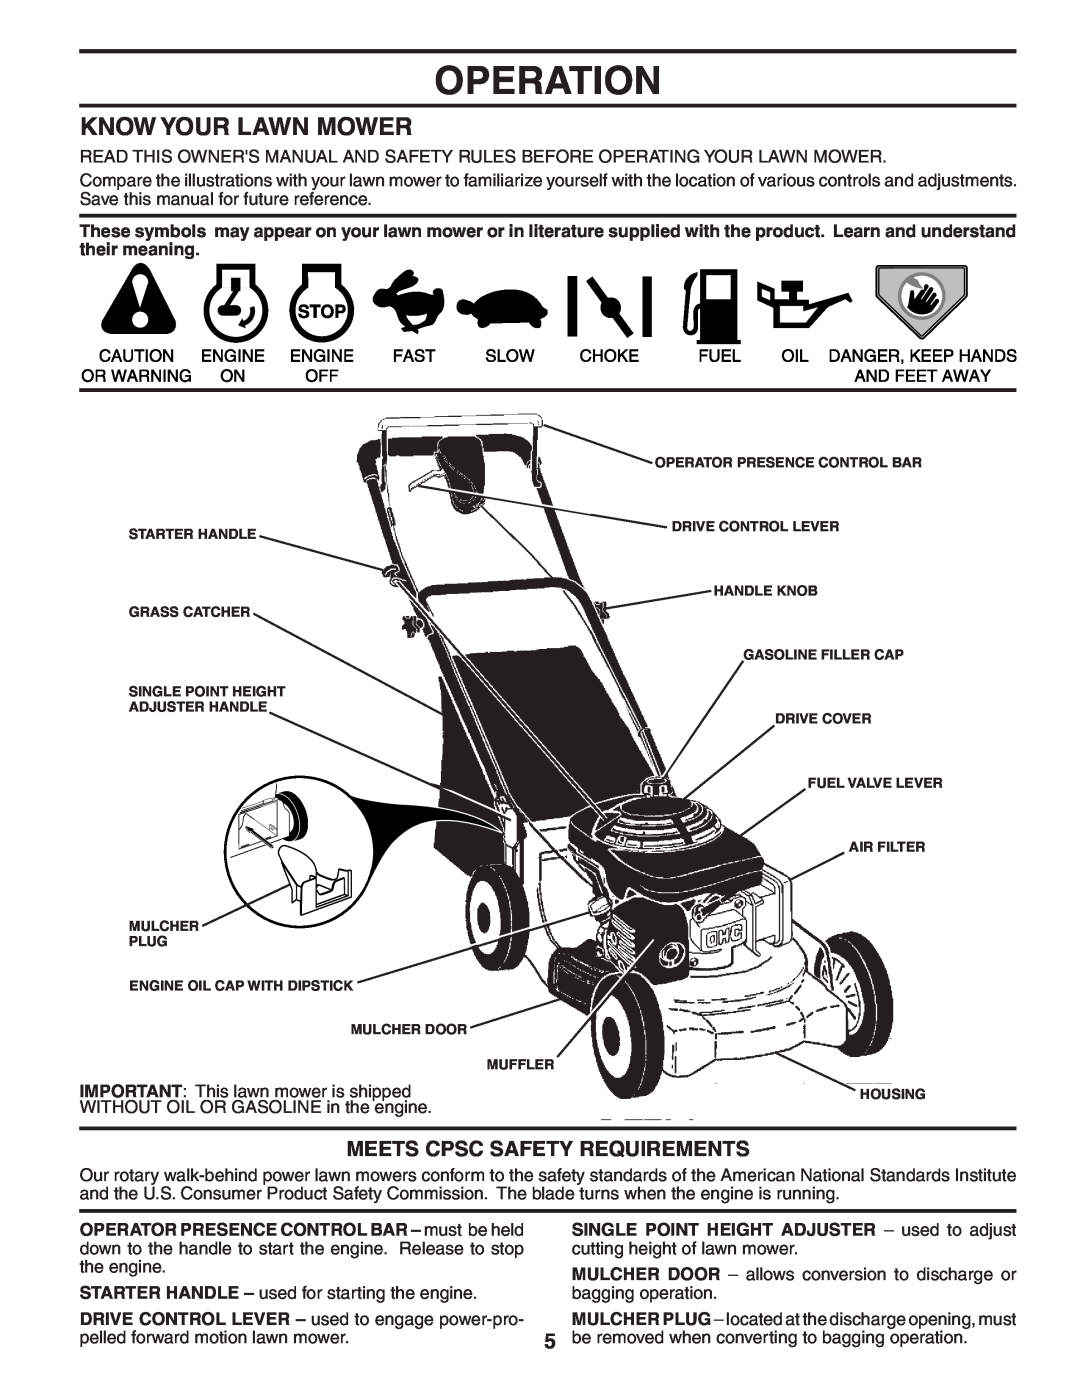 Husqvarna 5521RS owner manual Operation, Know Your Lawn Mower, Meets Cpsc Safety Requirements 